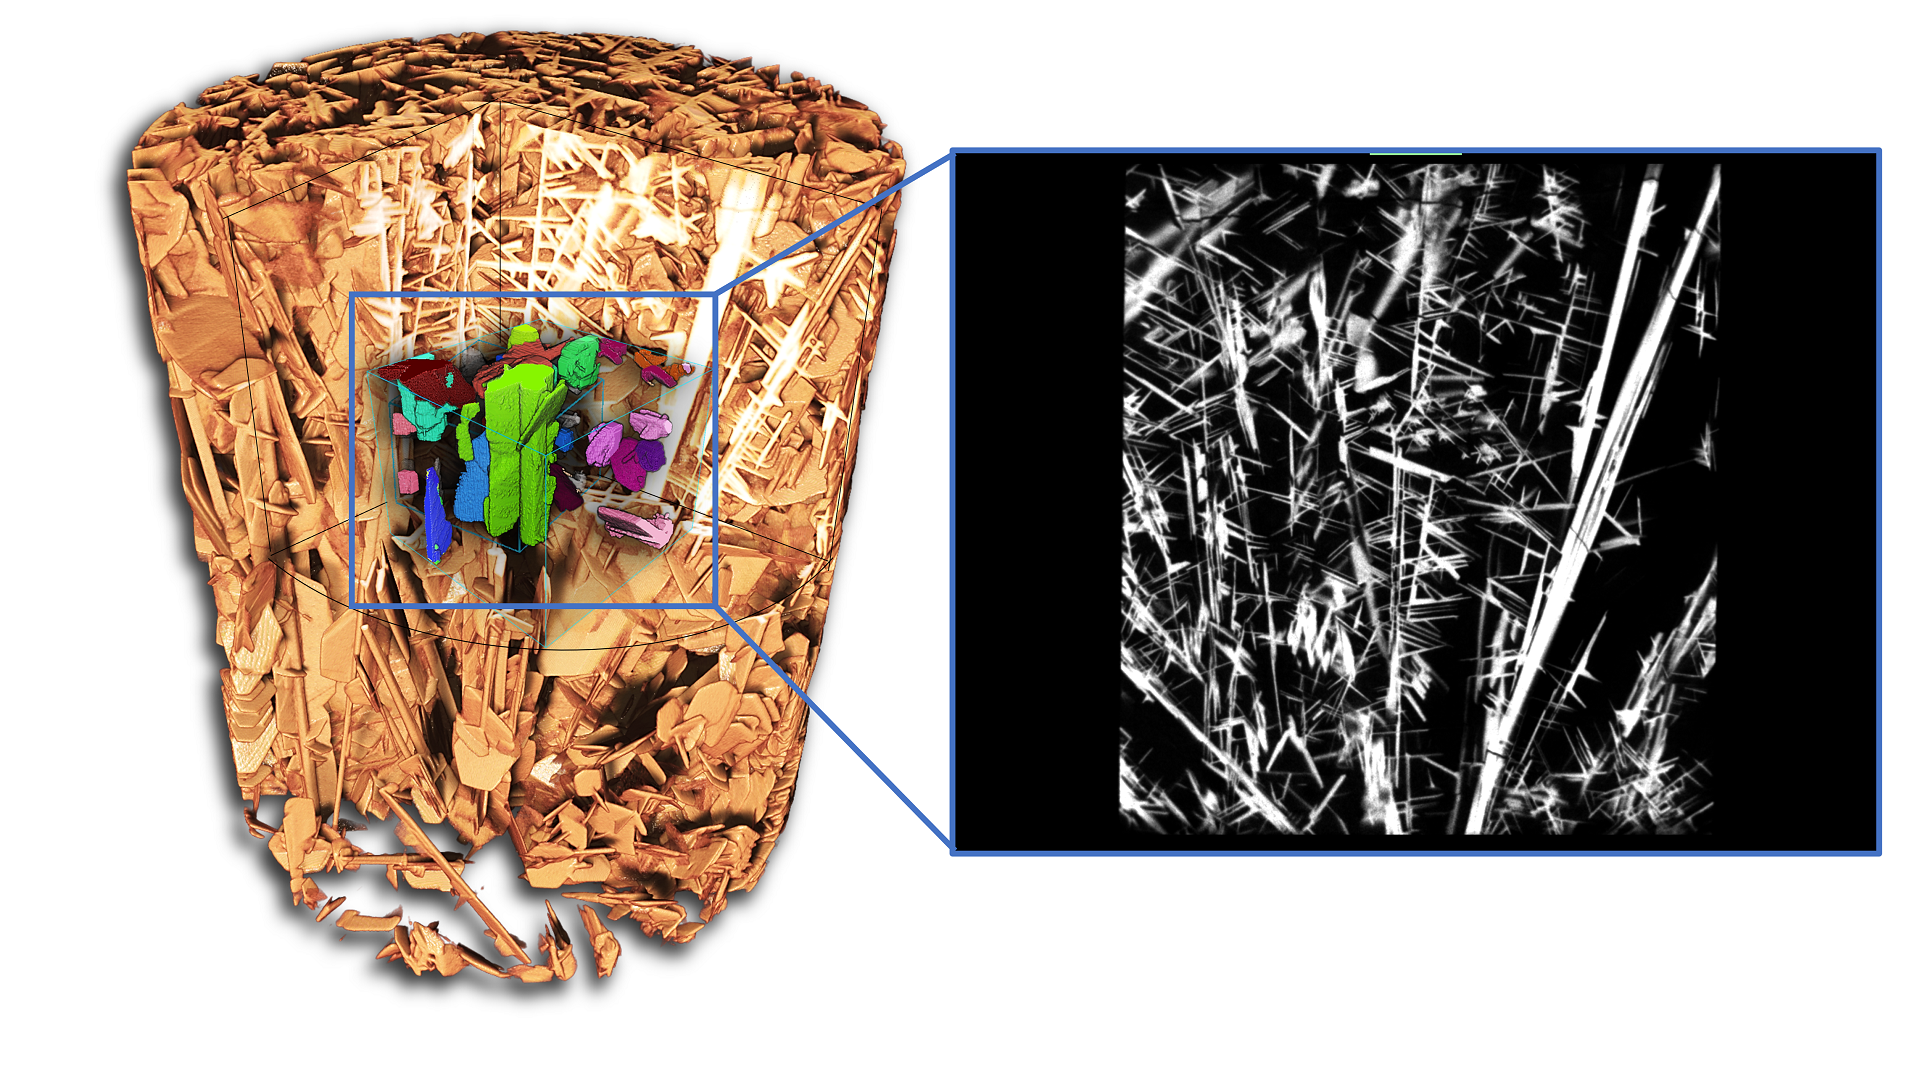 Left: 3D rendering of absorption contrast tomography data of a KBiS2 sample, with a portion cut to show the needle-shaped crystals. The central volume in color was used for a diffraction tomography study. Right: reconstructed slice view from the absorption tomography data reveals microstructural details of the rods and needle shaped crystals. Data acquired with ZEISS Xradia Versa.